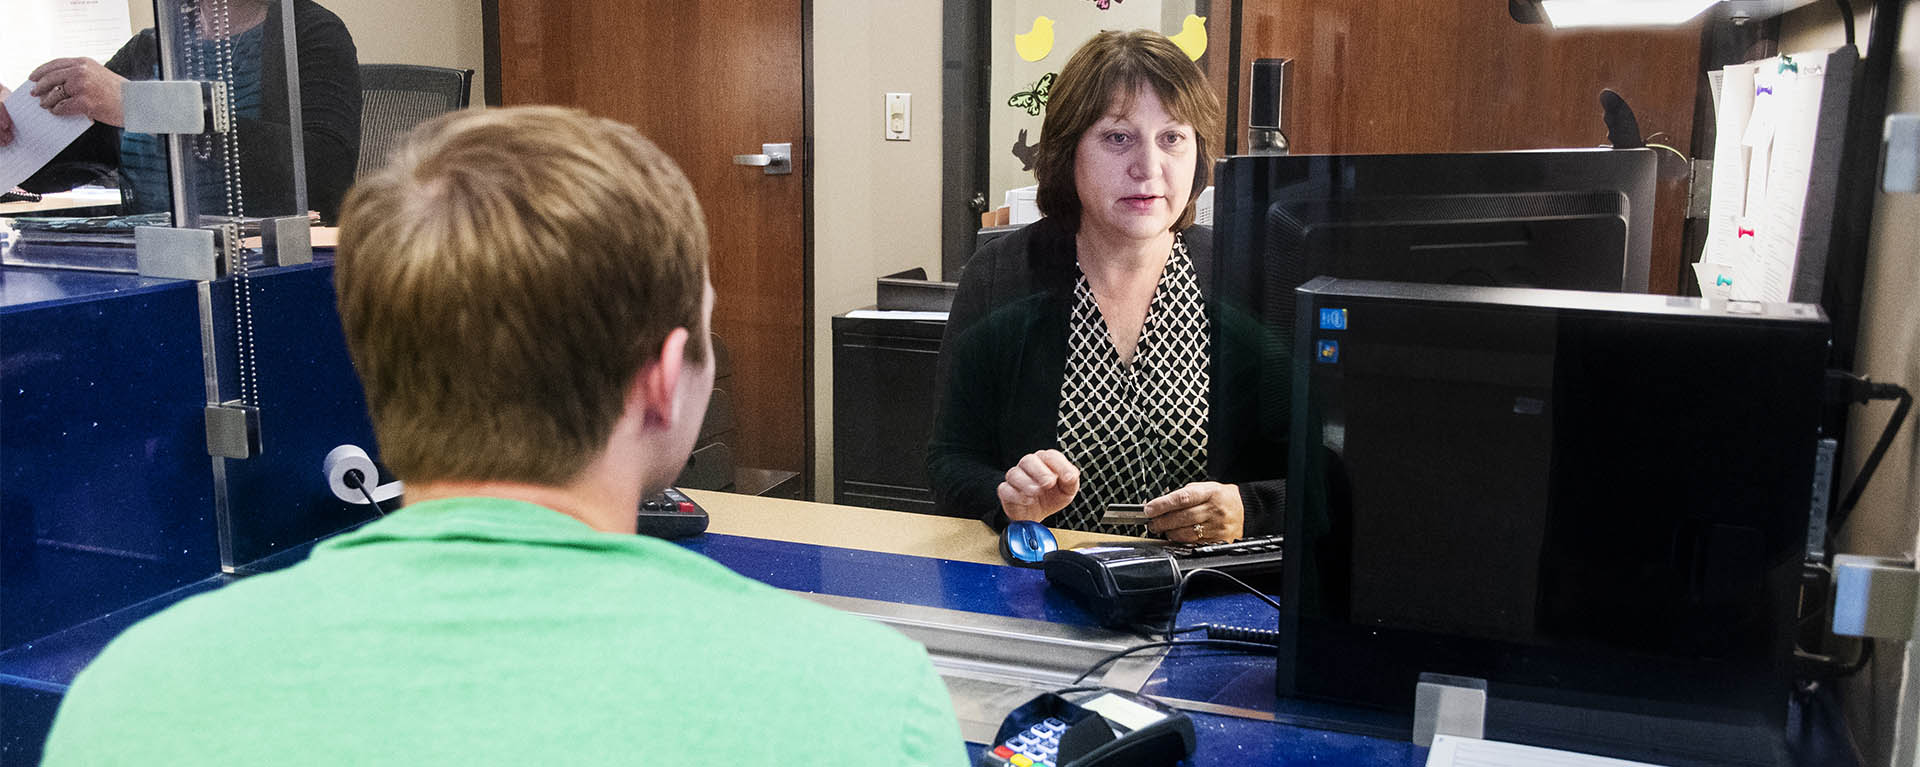 A Washburn Business Office employee helps a student in Morgan Hall.